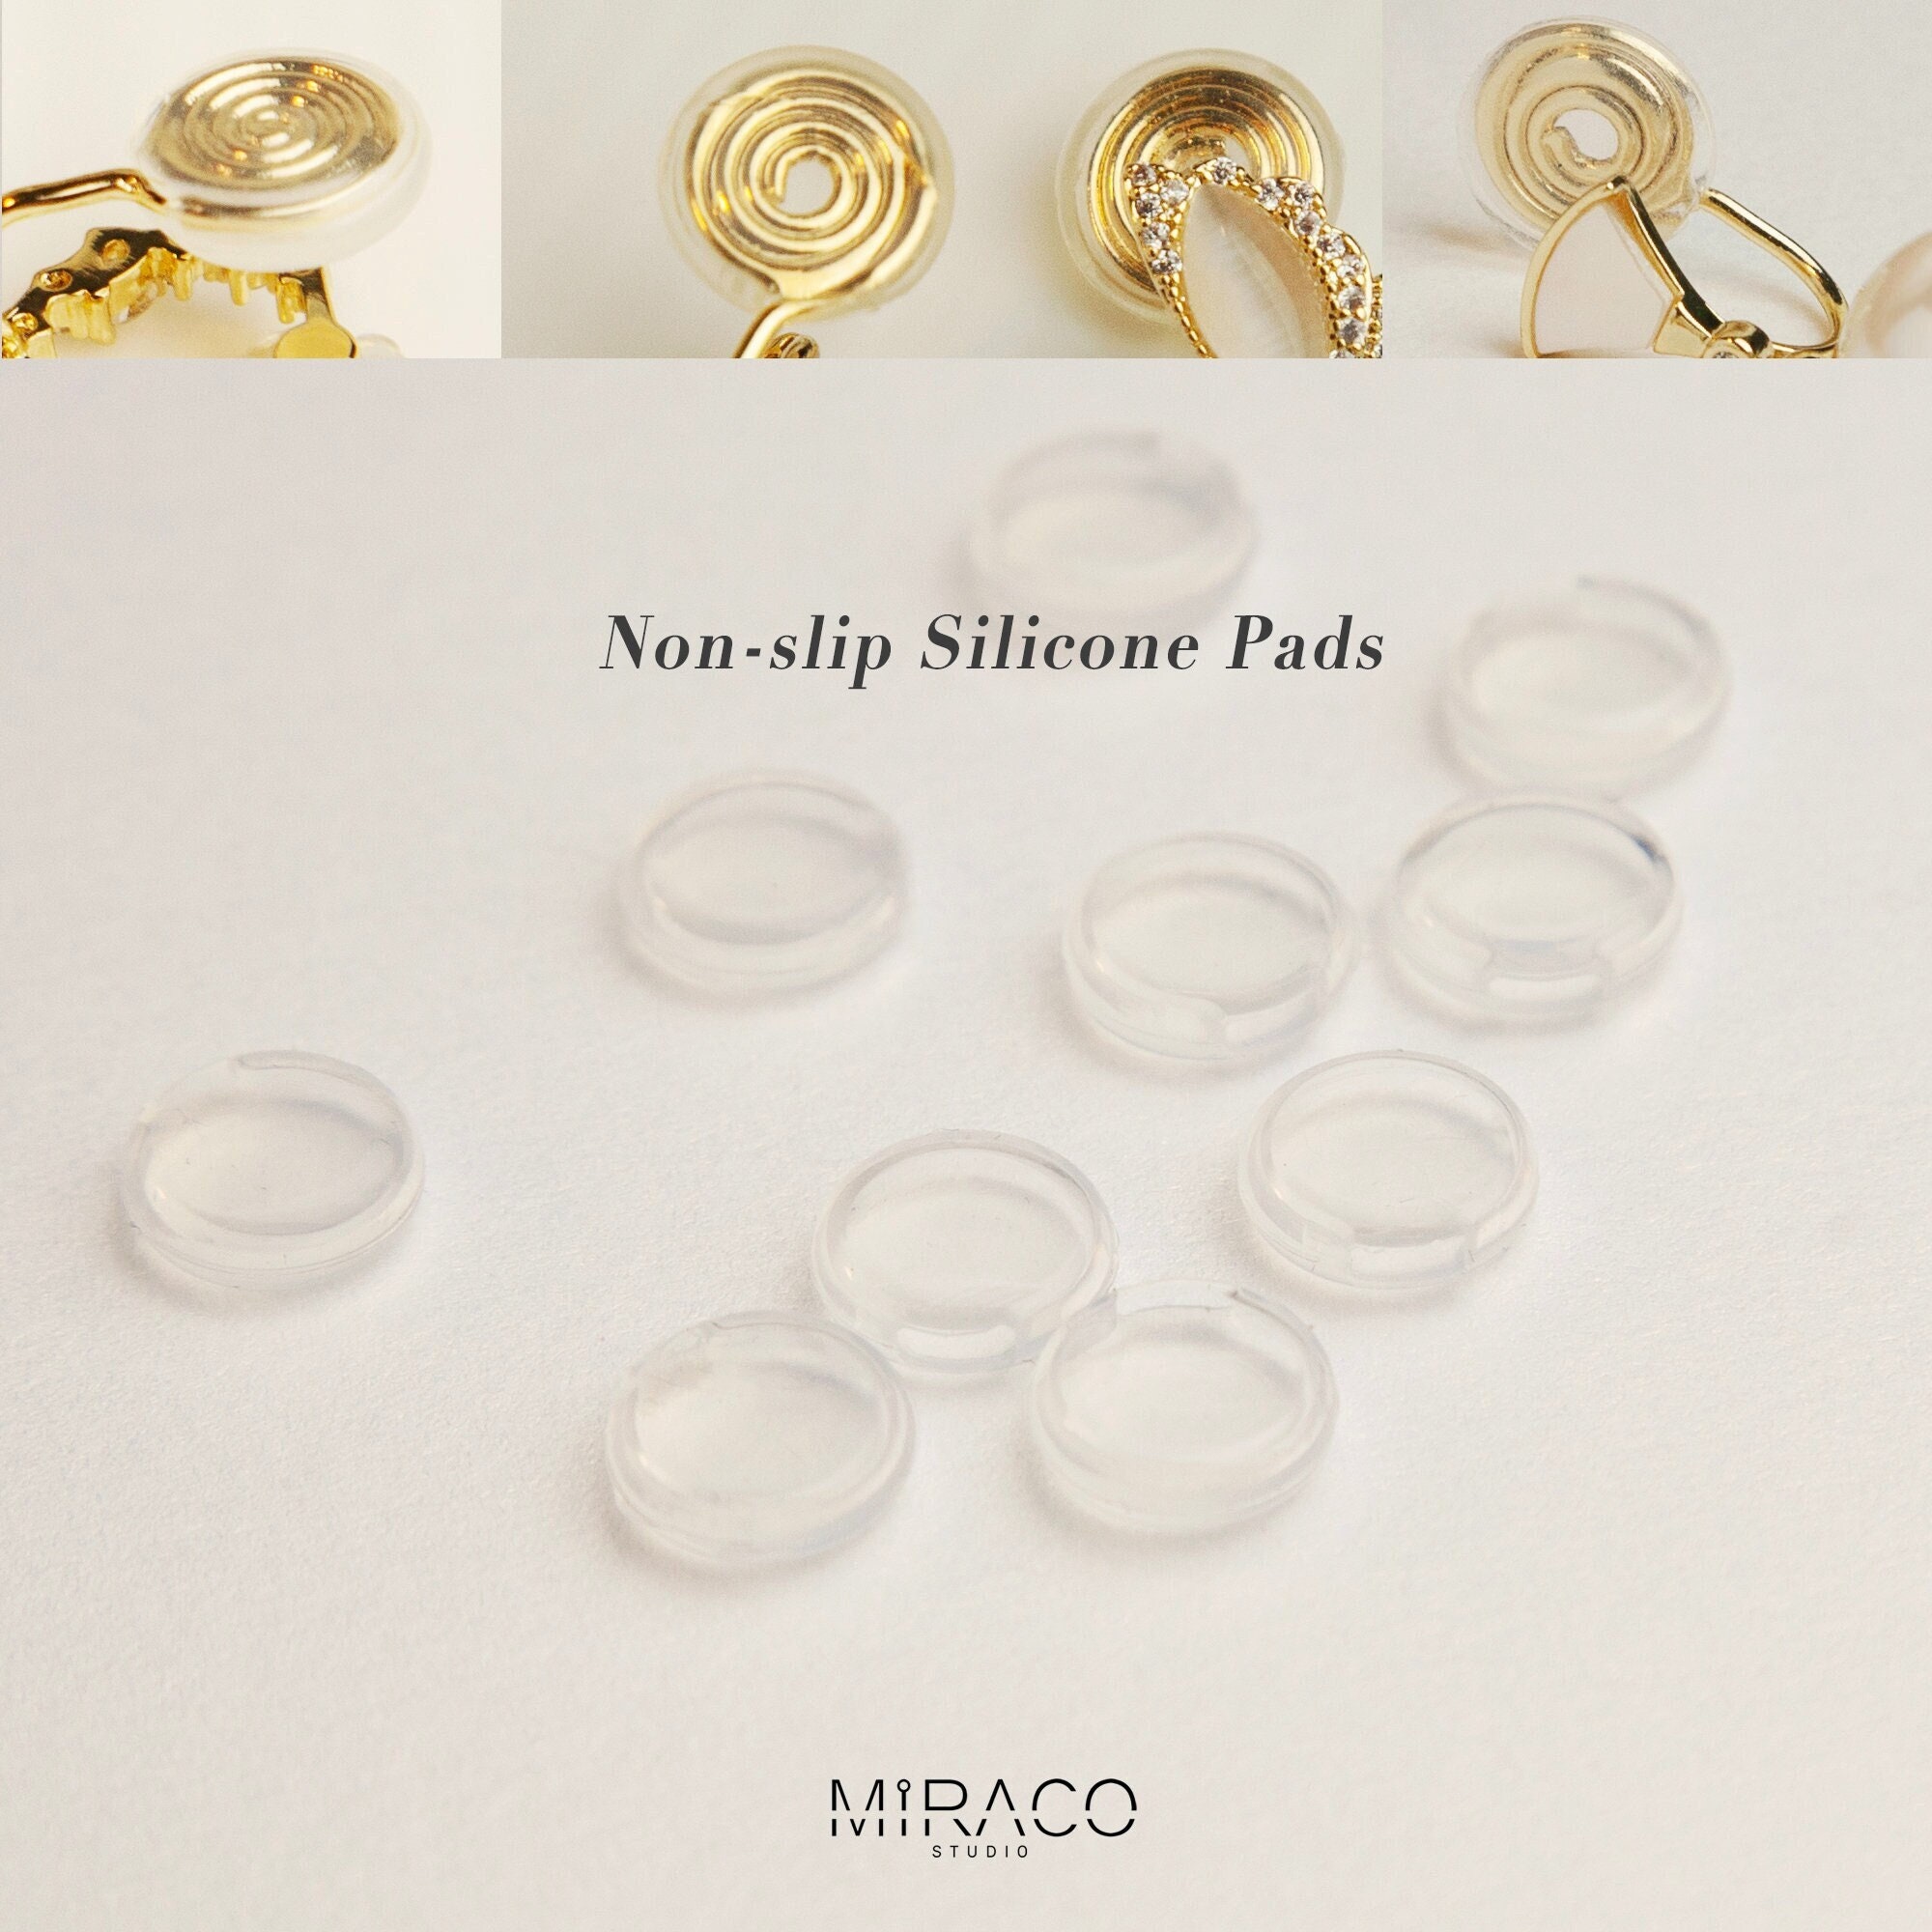  Earring Backs, Earring Backs for Studs, Replacements for  Studs/Droopy Ears,18k Gold Locking Silicone Earring Backs  No-Irritatehypoallergenic Soft Clear Earring Backs for Adults & Kids,  12pcs/6 Pairs